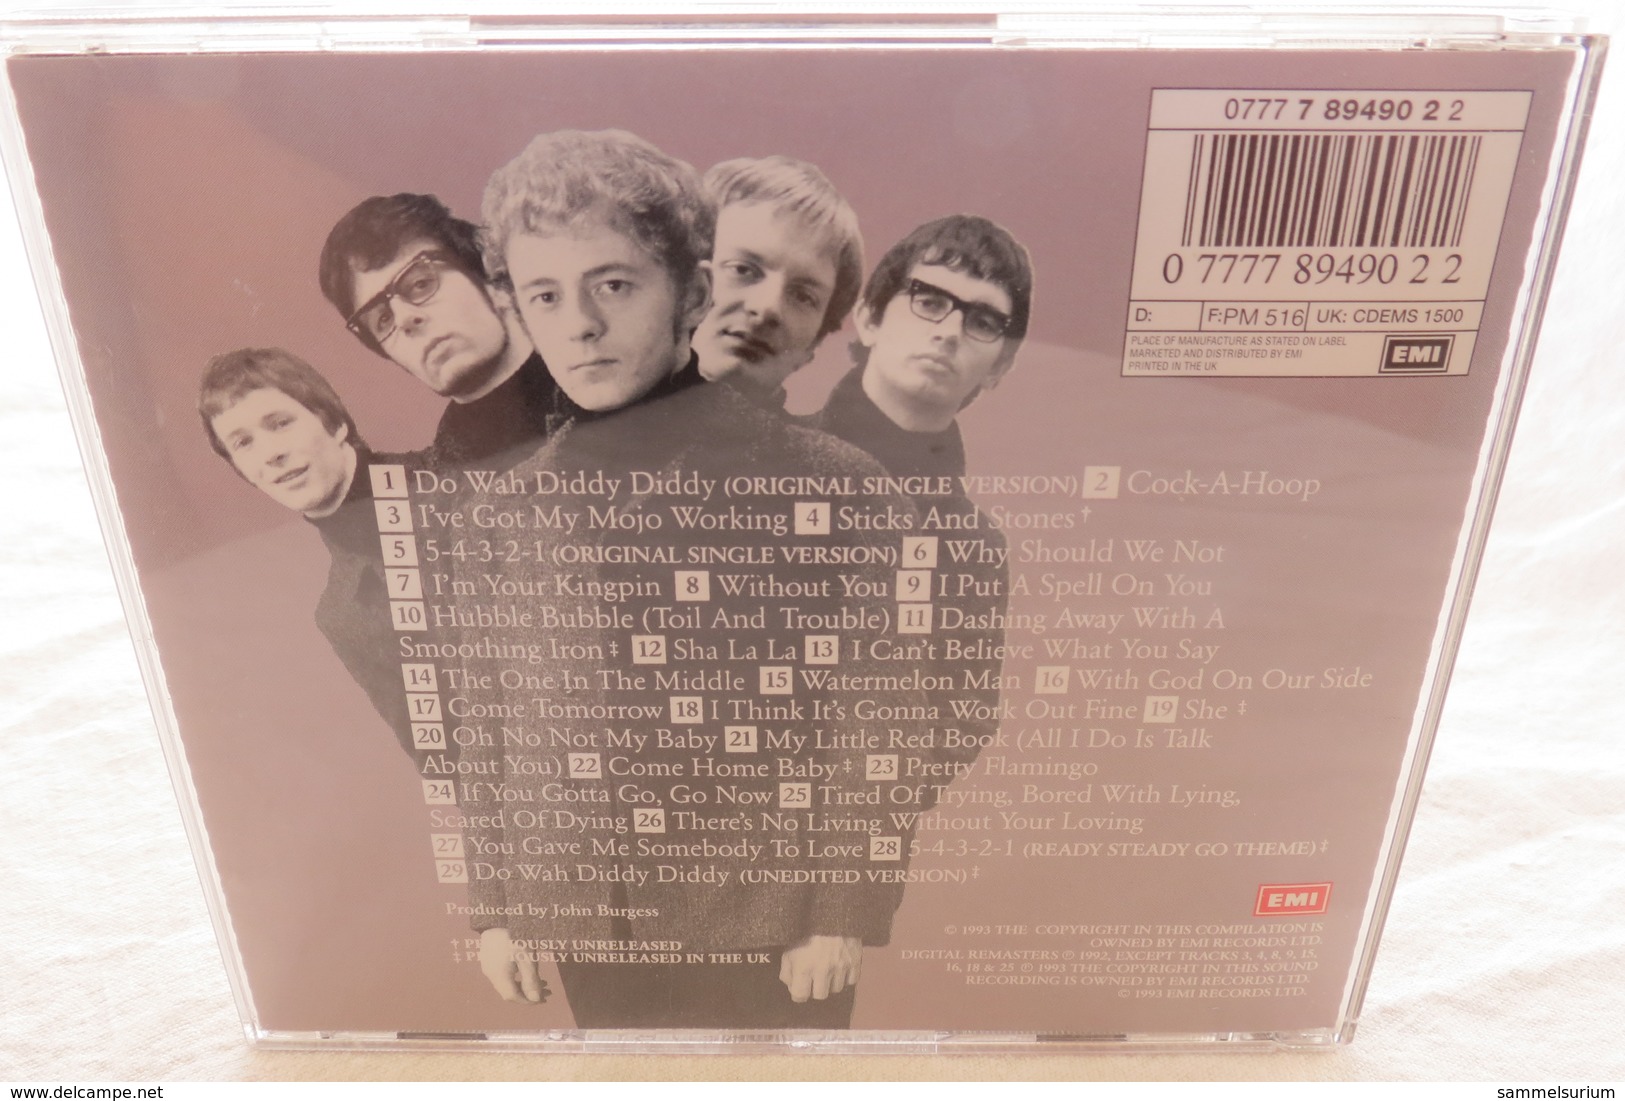 CD "Manfred Mann" The Best Of EMI Years - Hit-Compilations